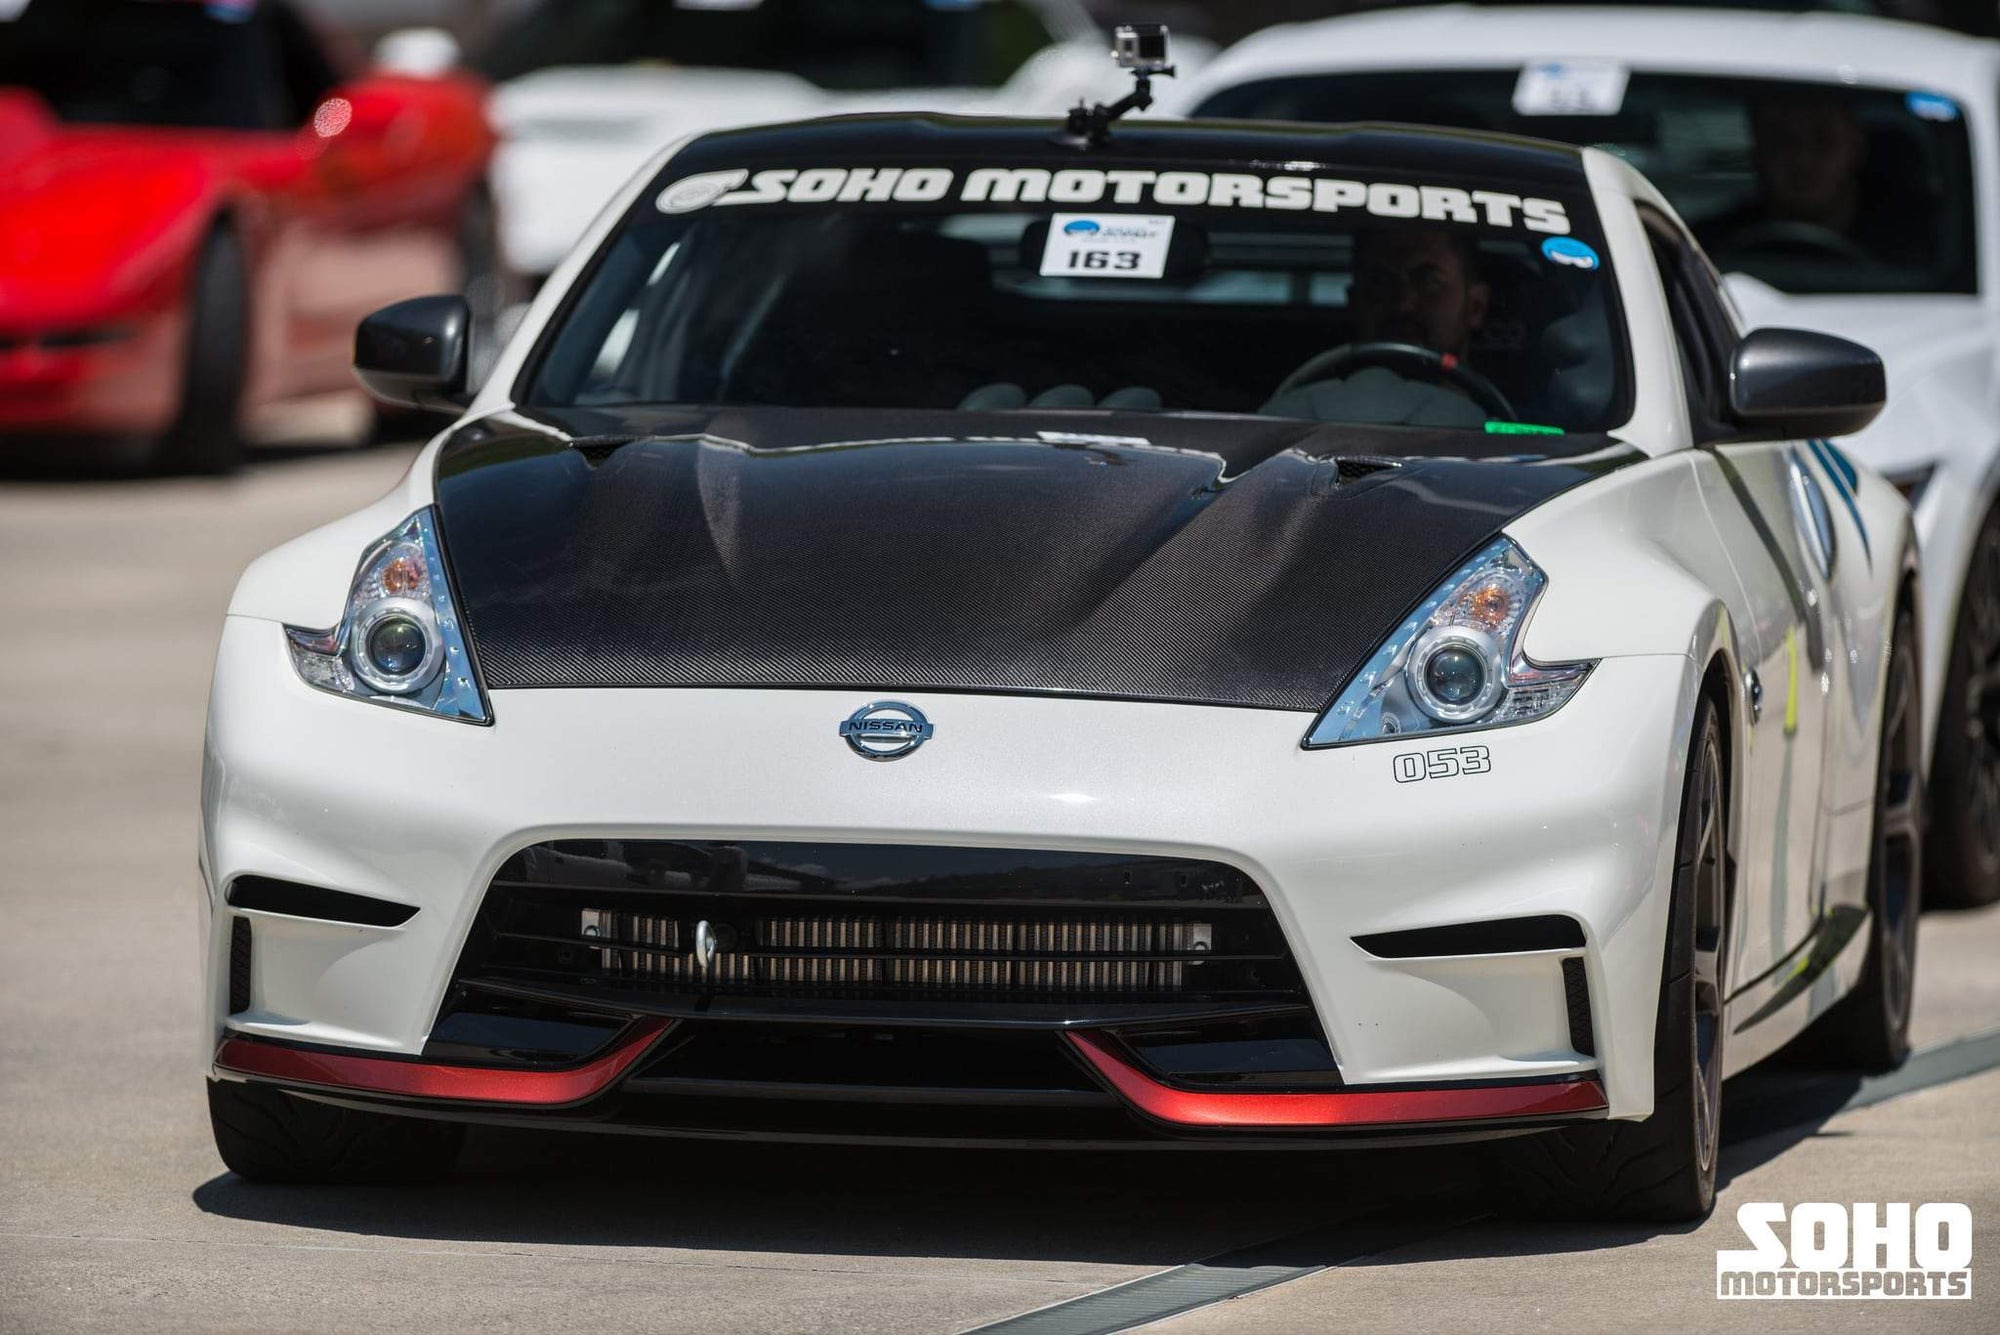 The Quest For The Highest HP 370Z On Pump Gas! - SOHO Motorsports